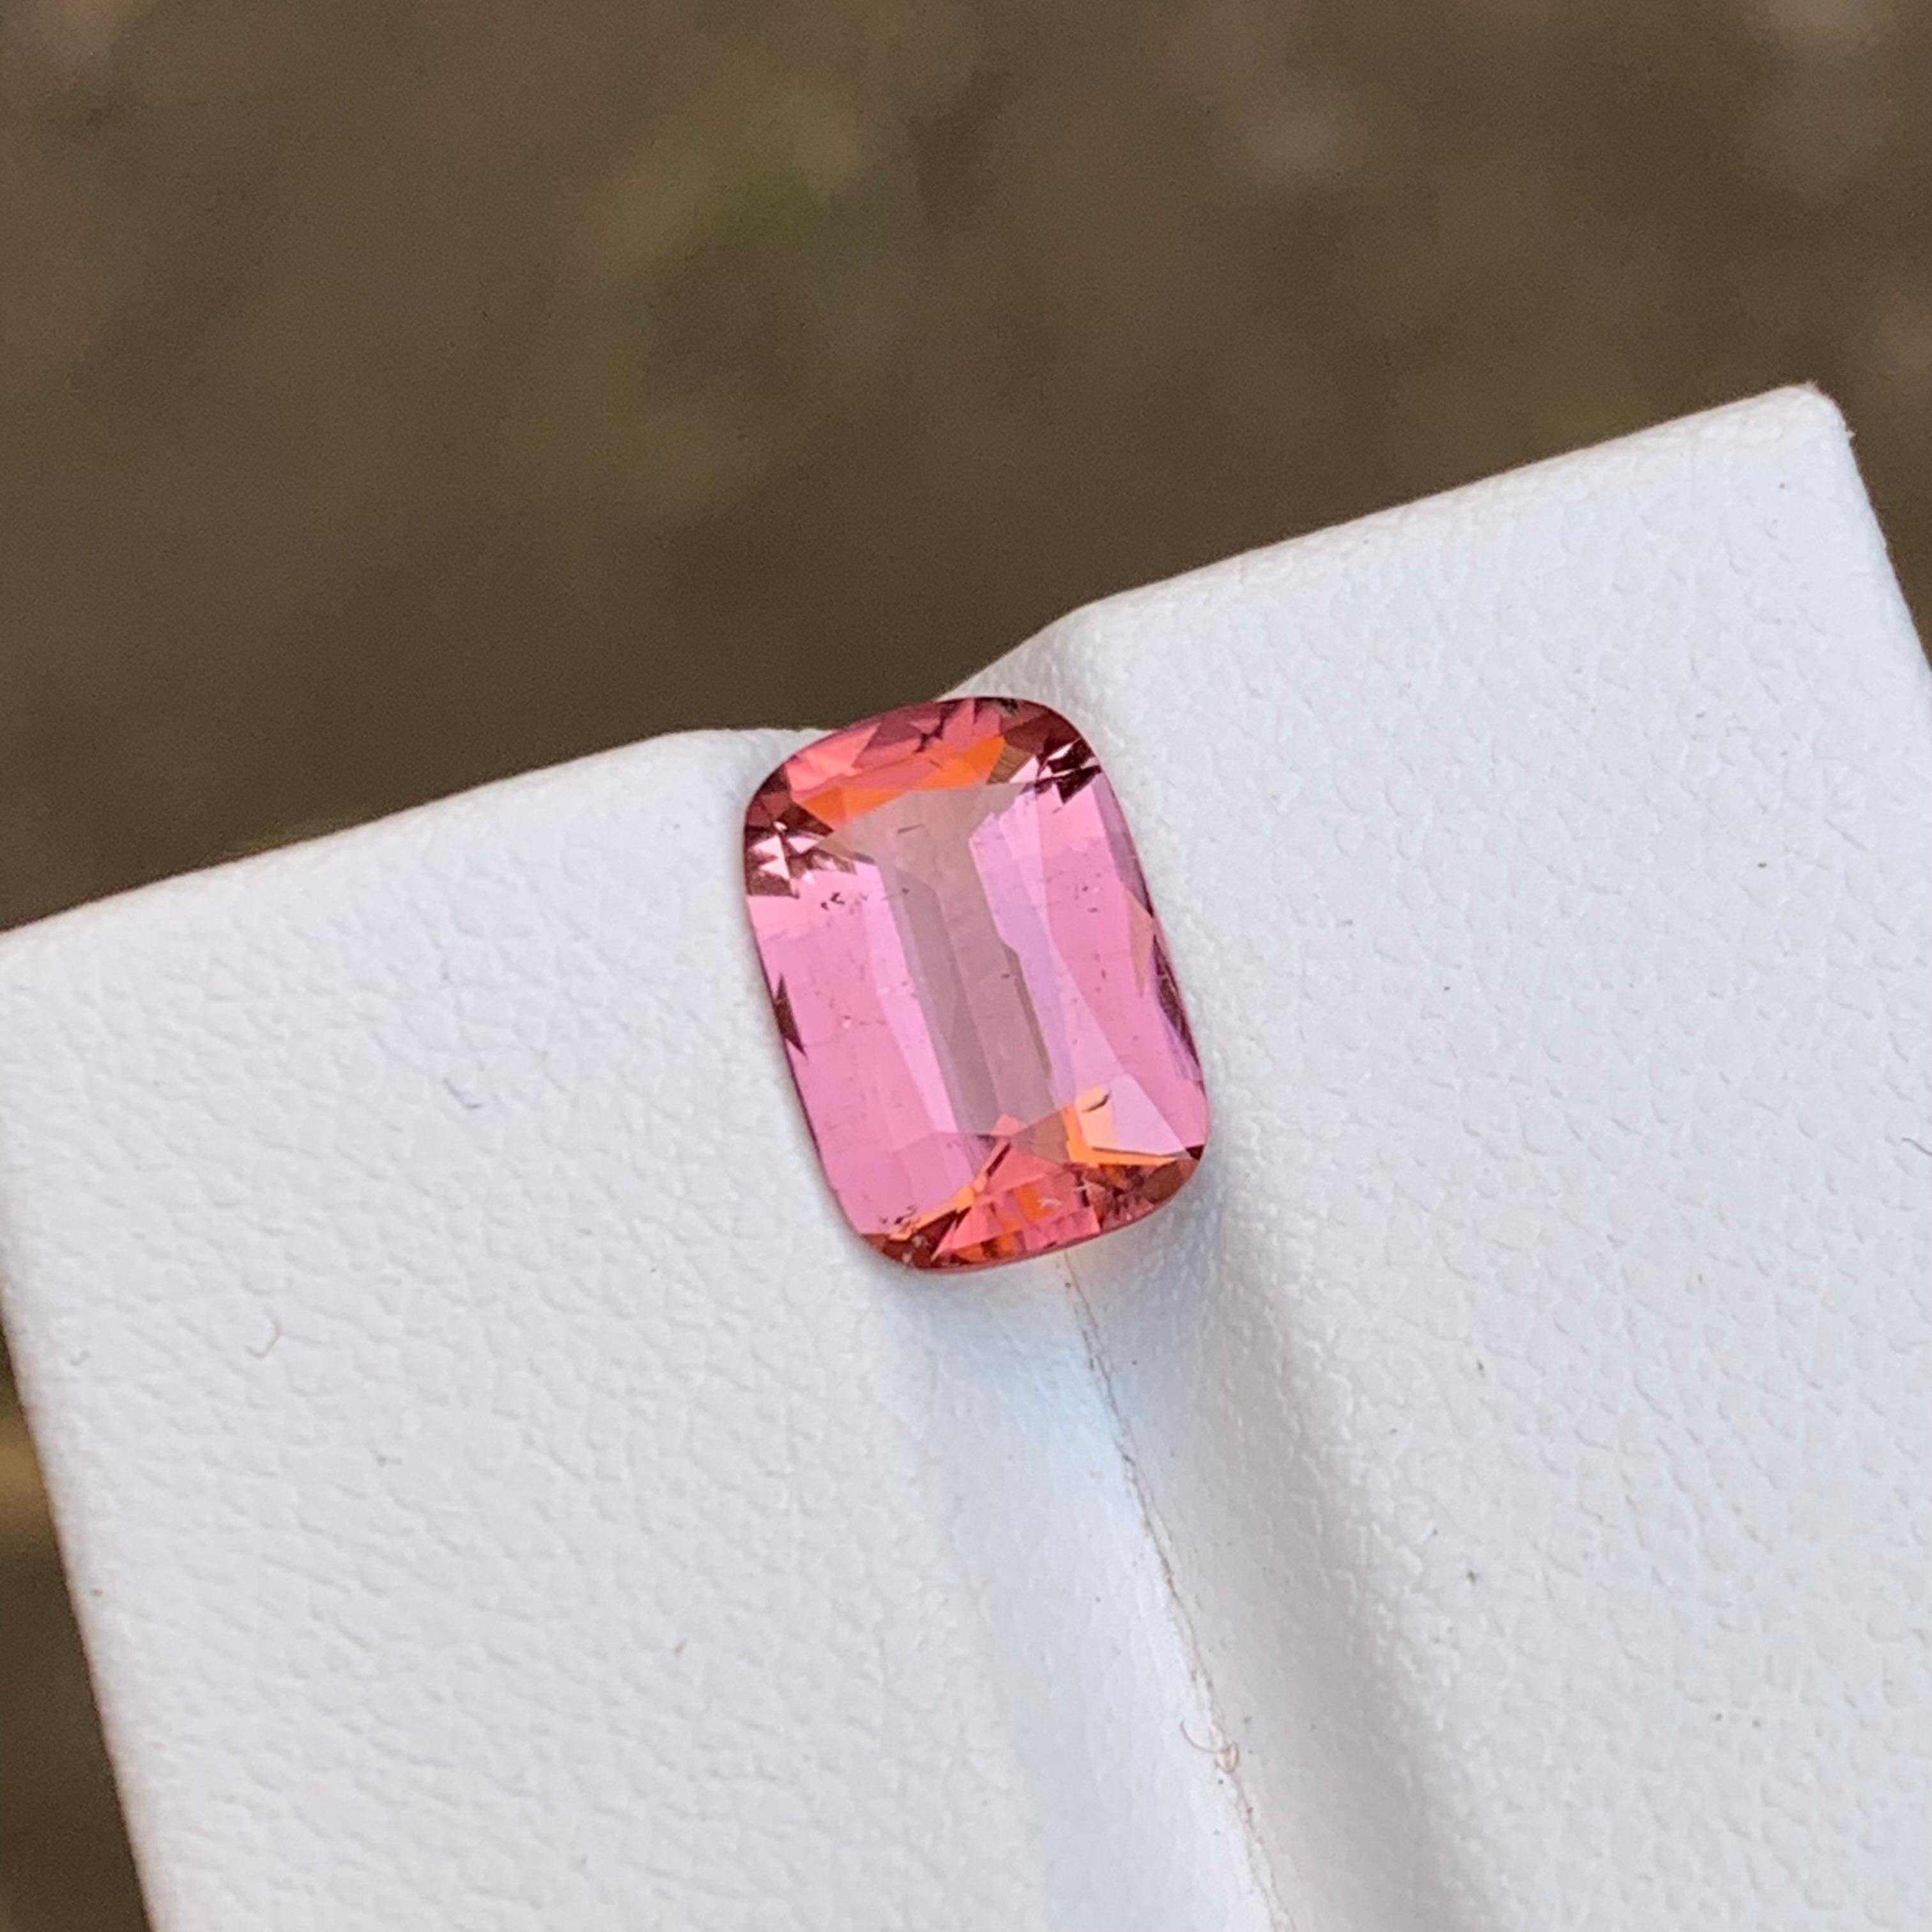 Women's or Men's Rare Pink Natural Tourmaline Loose Gemstone, 2.30 Ct Cushion Cut Ideal for Ring For Sale